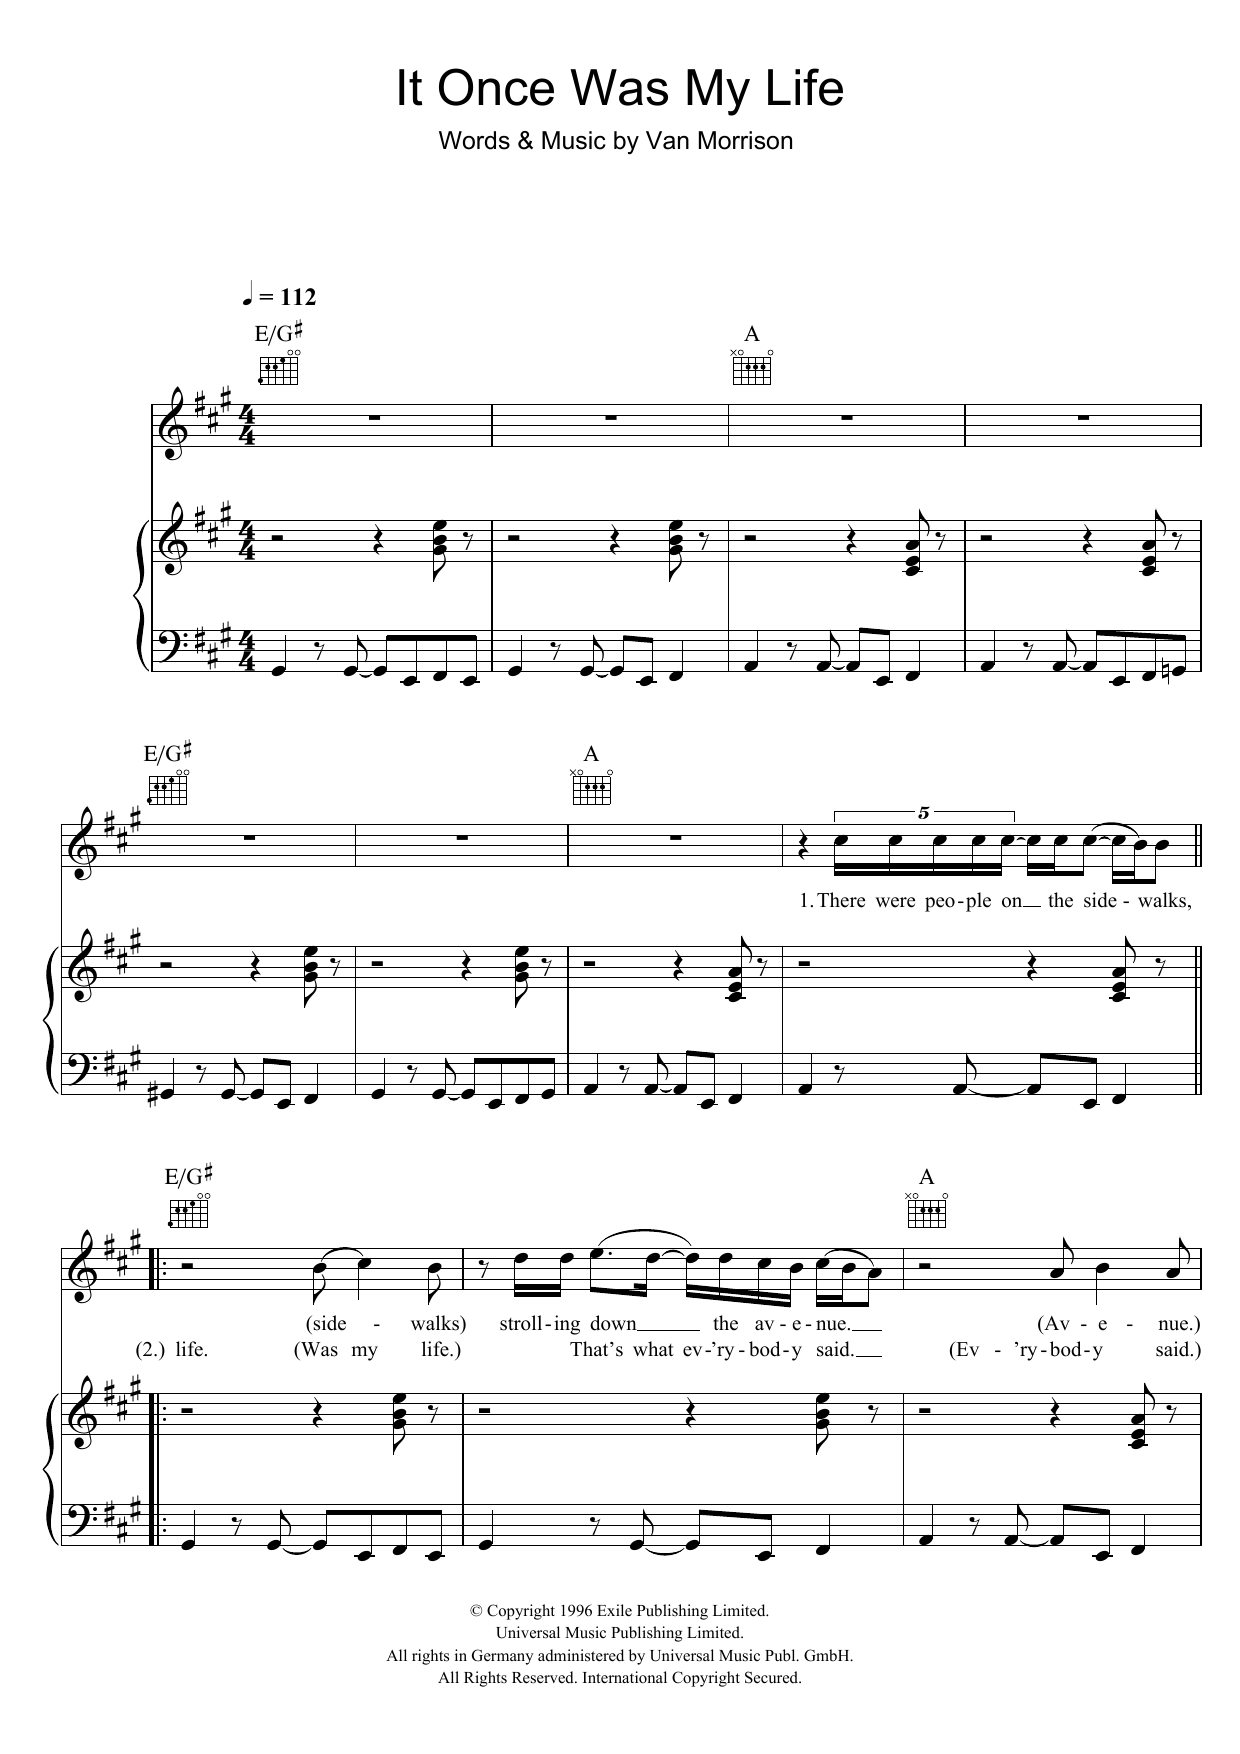 Download Van Morrison It Once Was My Life Sheet Music